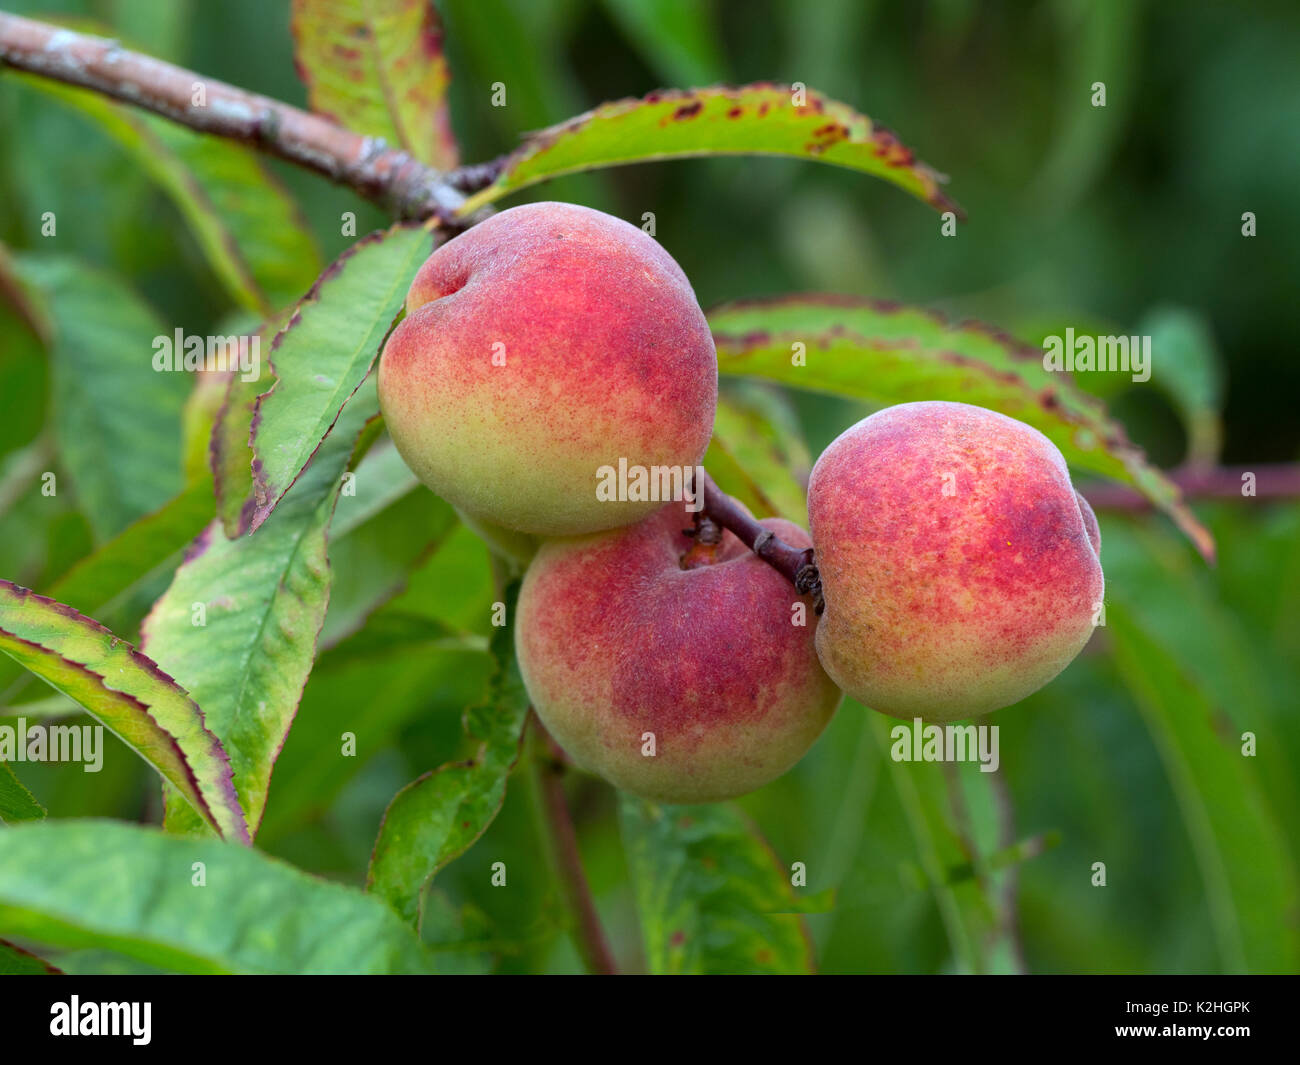 Peach Tree Prunus persica Melred growing in container Stock Photo